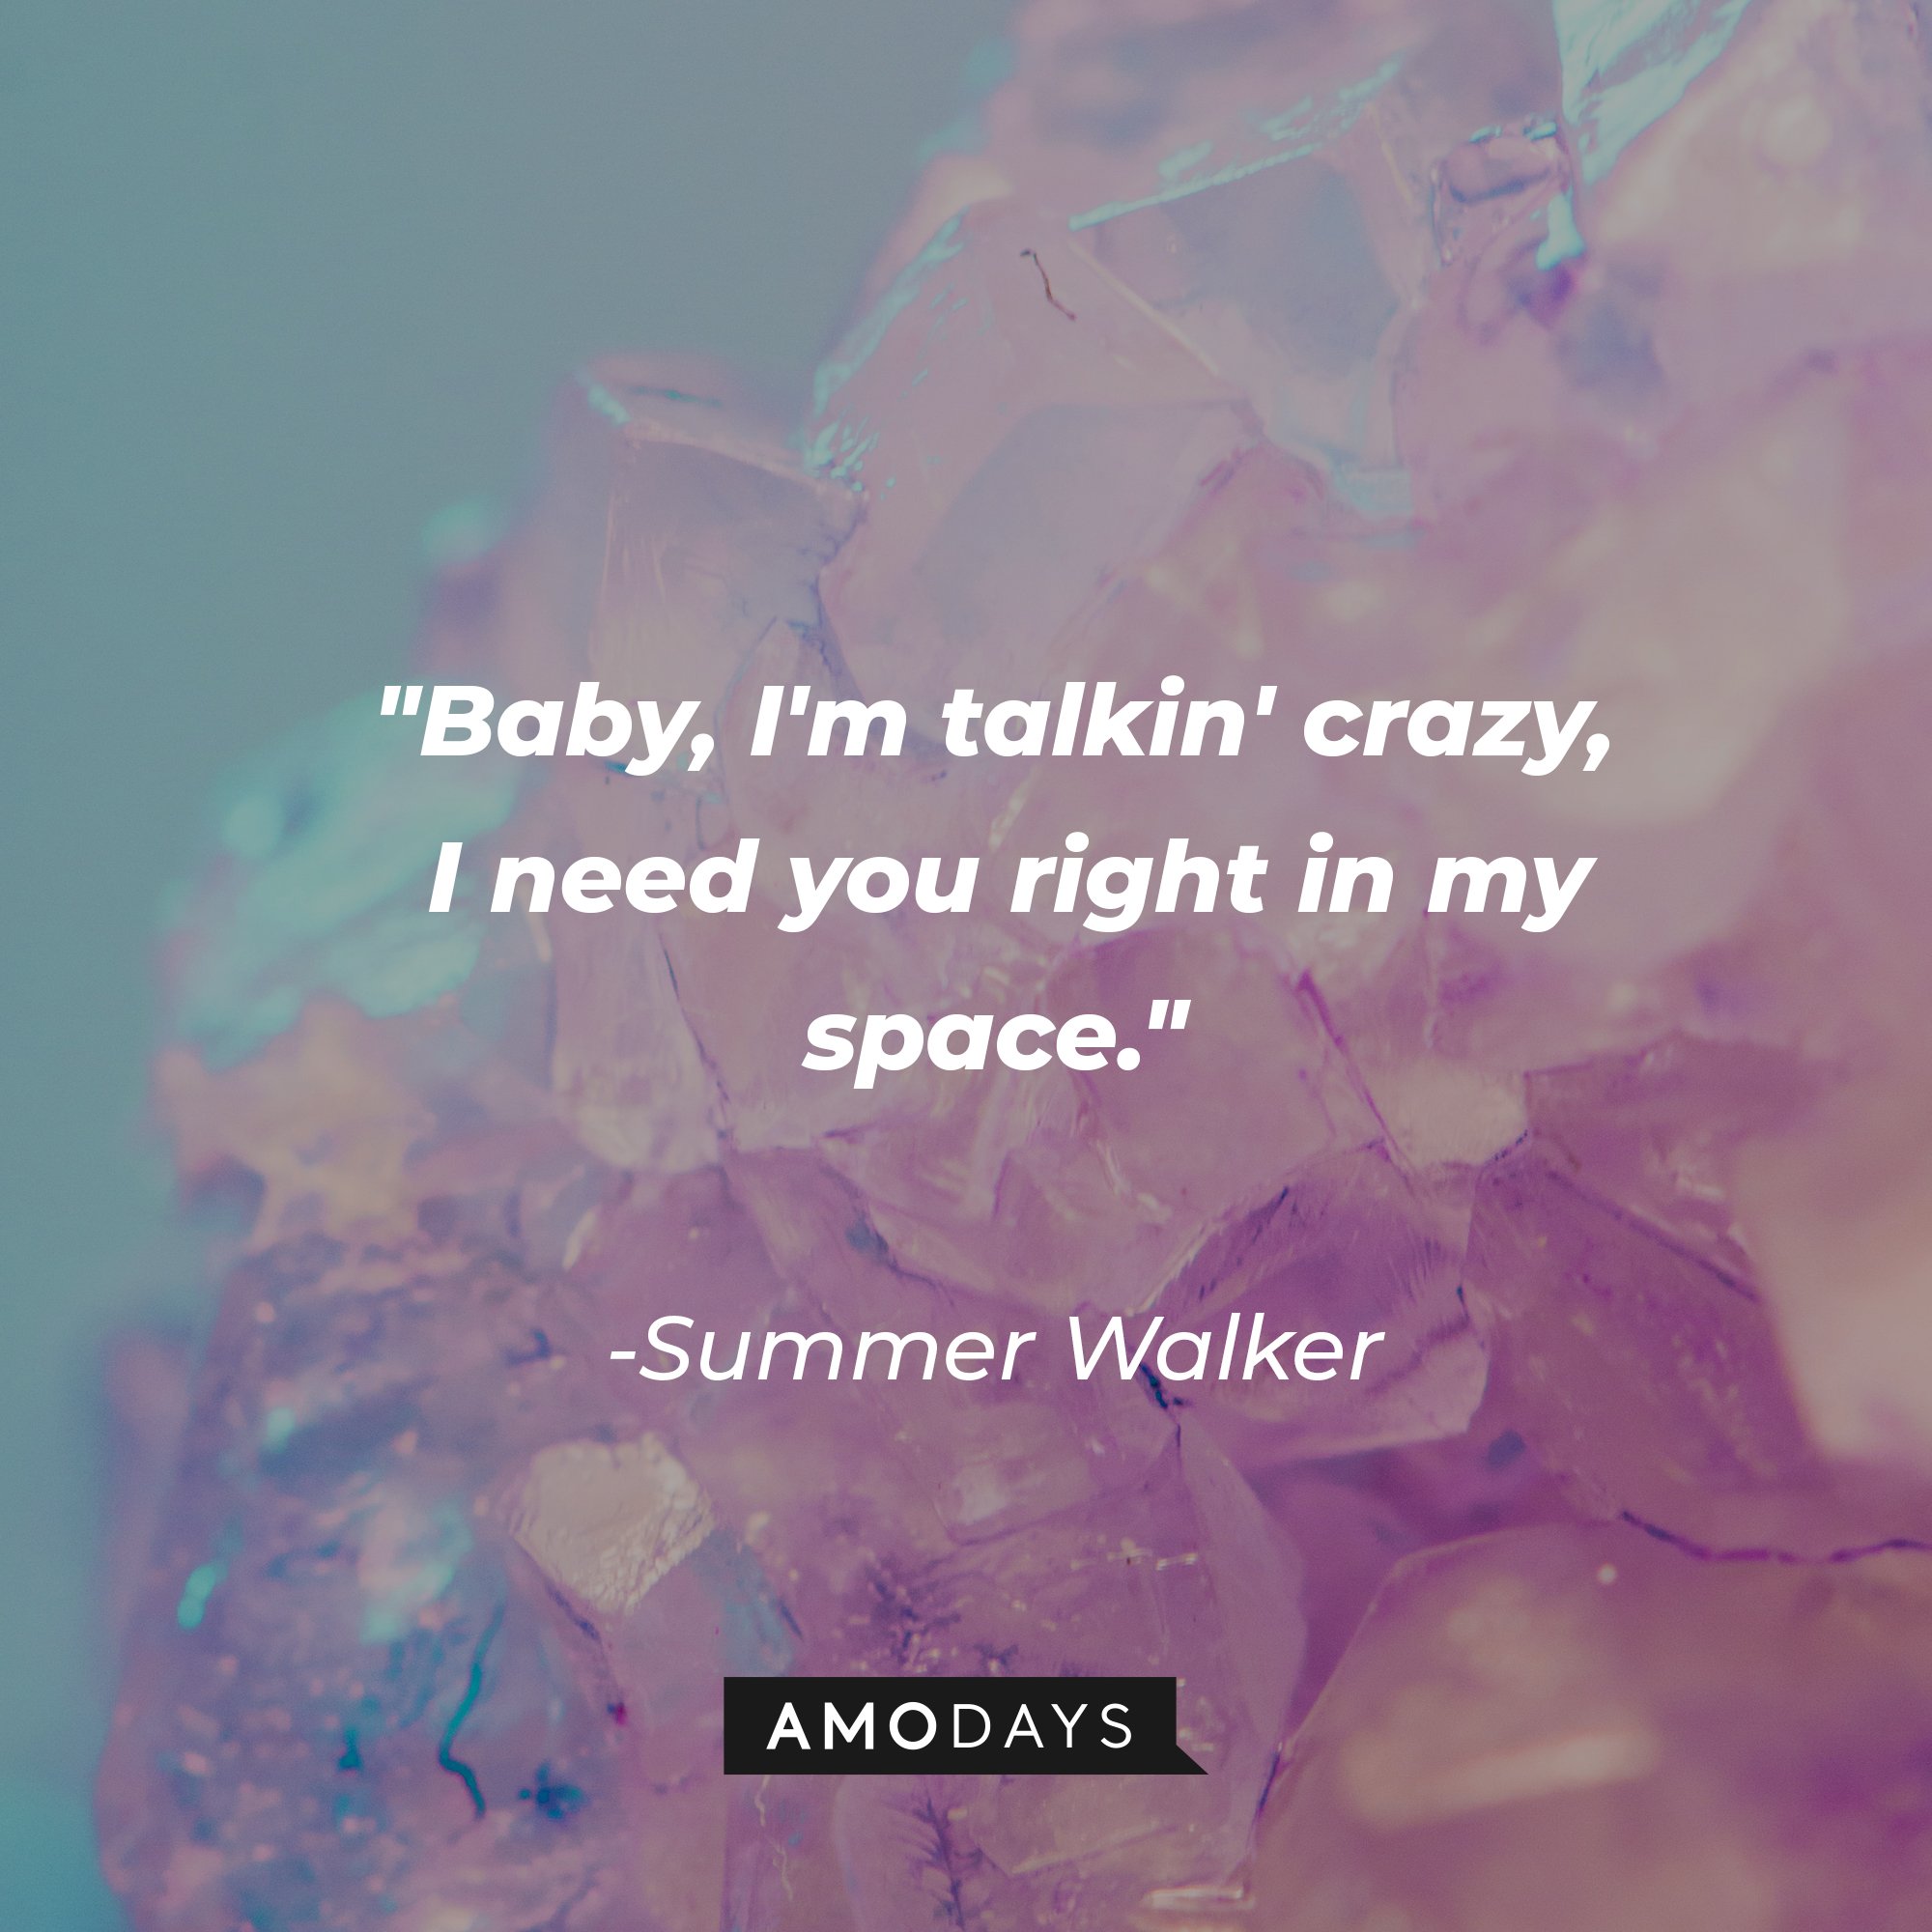 Summer Walker's quote: "Baby, I'm talkin' crazy, I need you right in my space." | Image: AmoDays